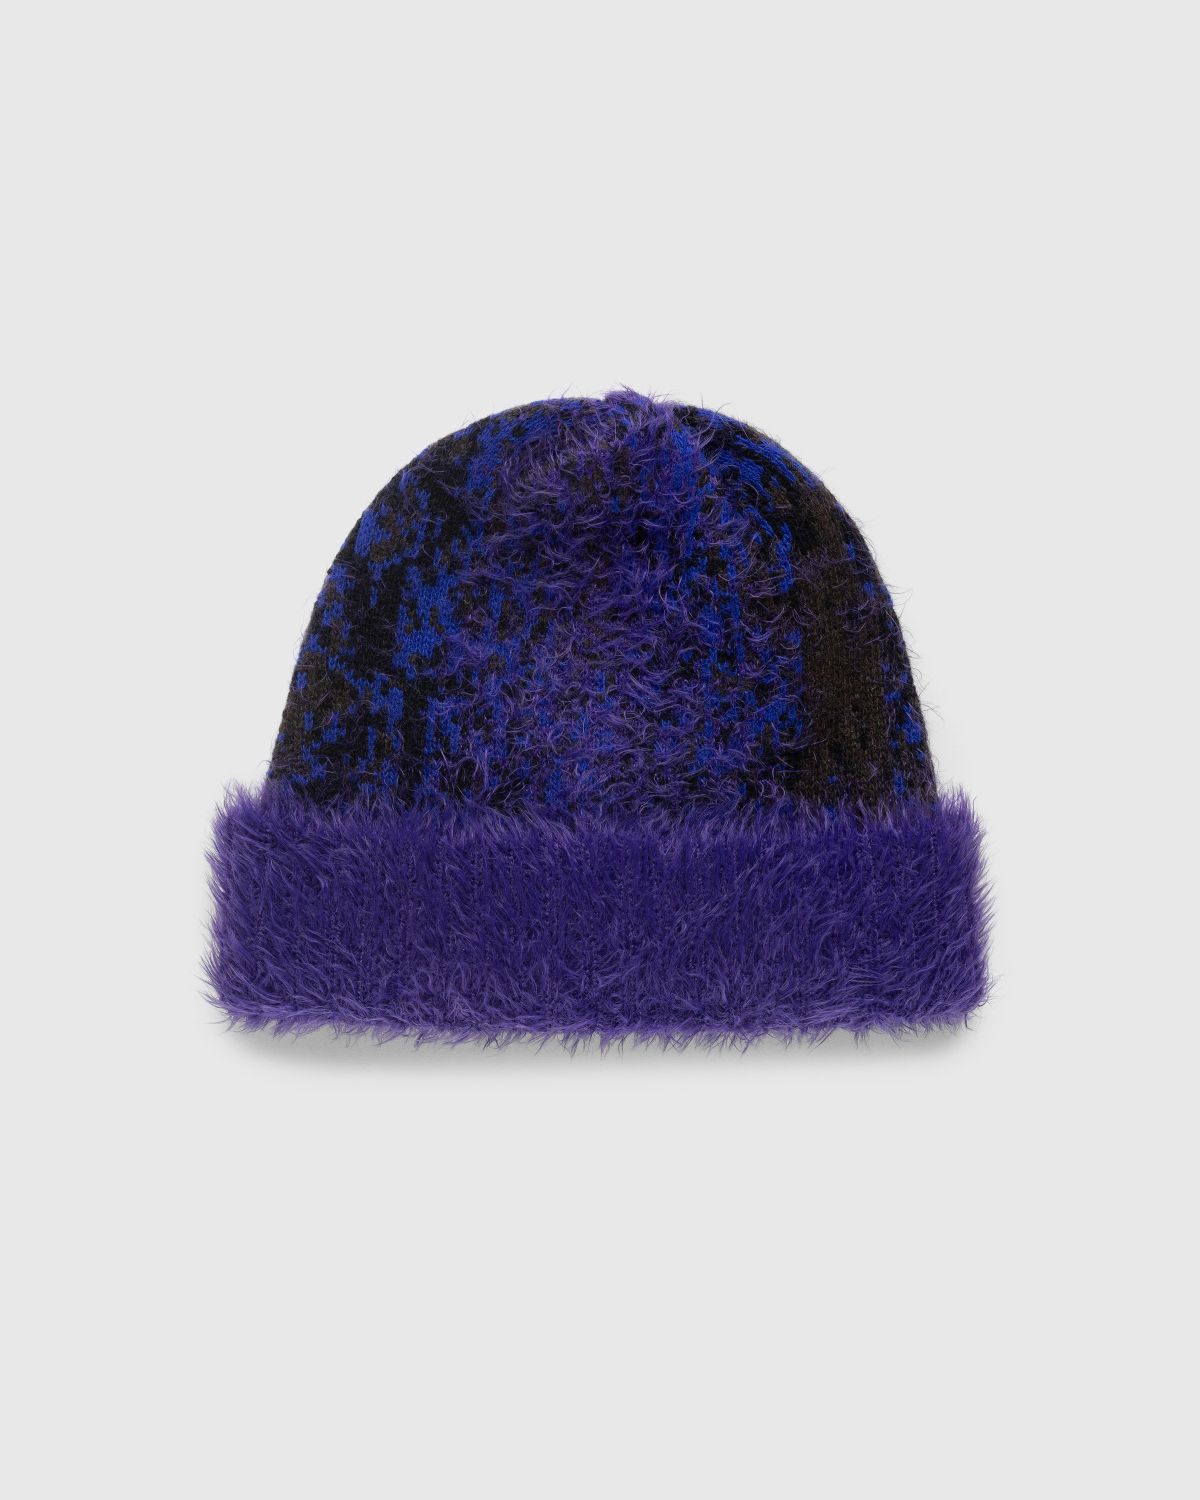 Y/Project – Gradient Hairy Knit Beanie Purple/Blue/Brown - Hats - Multi - Image 3